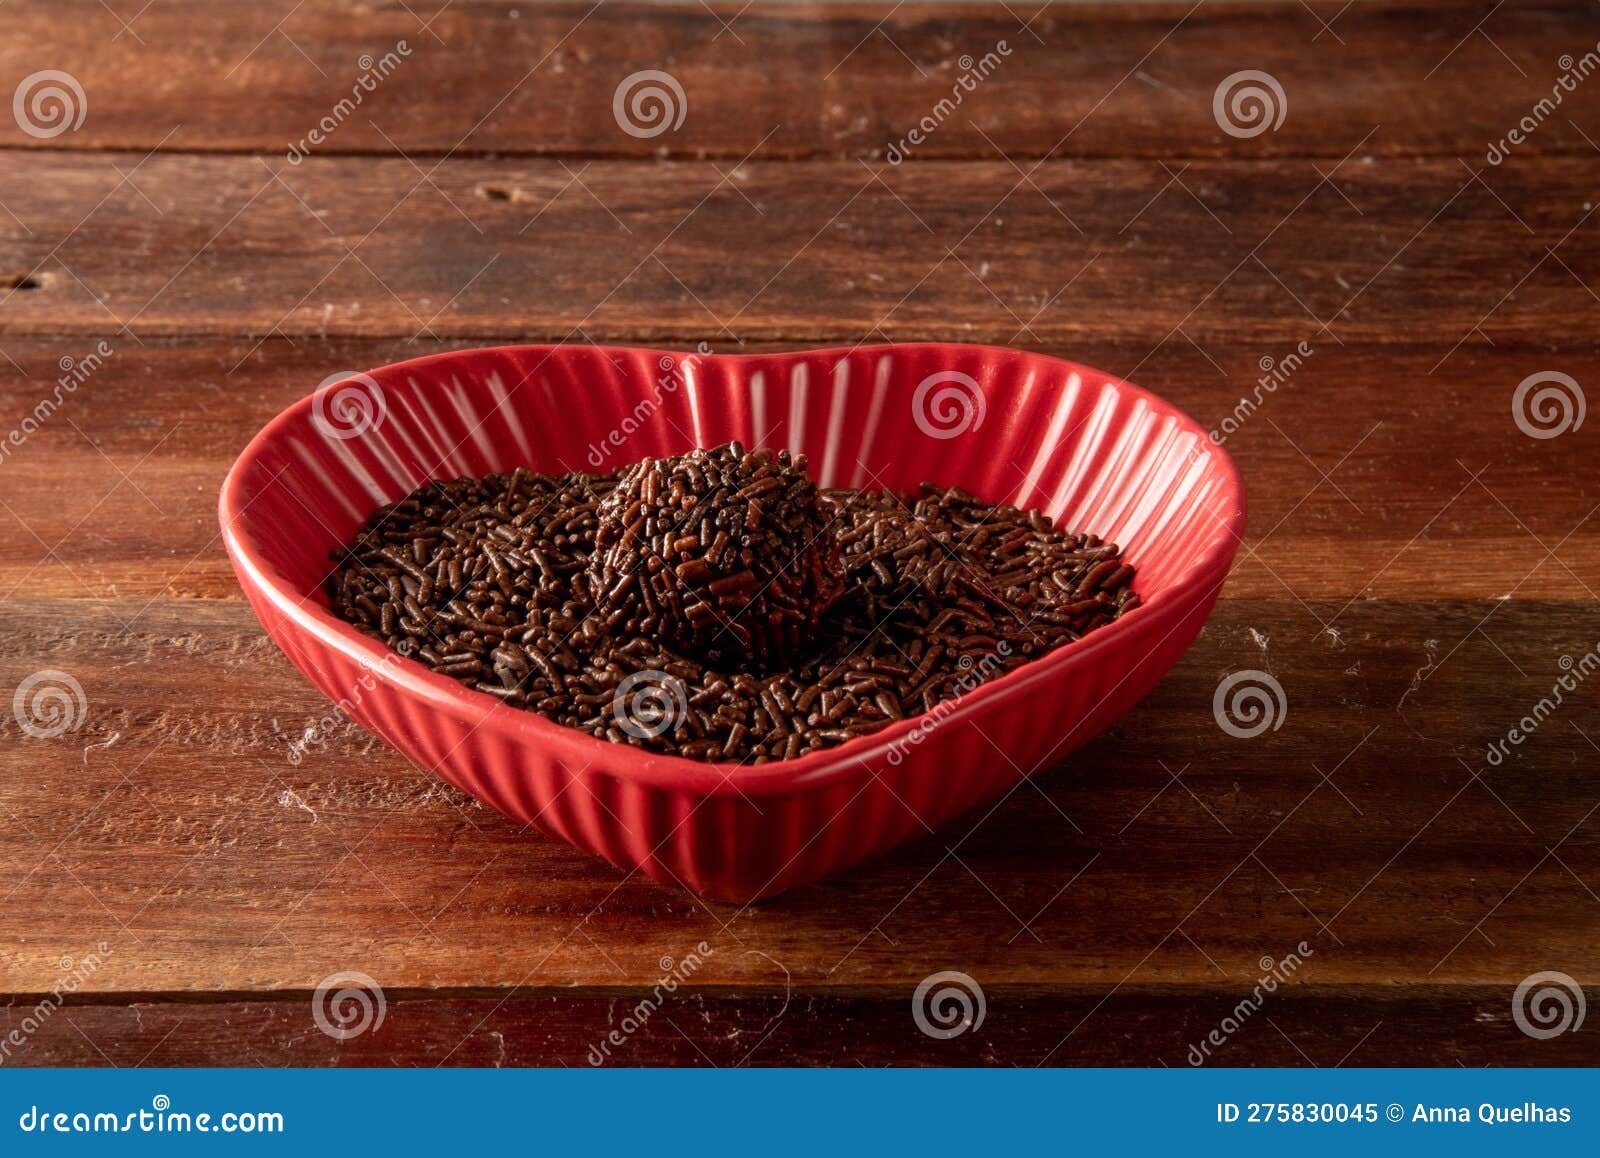 brigadeiro over a red heart d bowl and wooden background